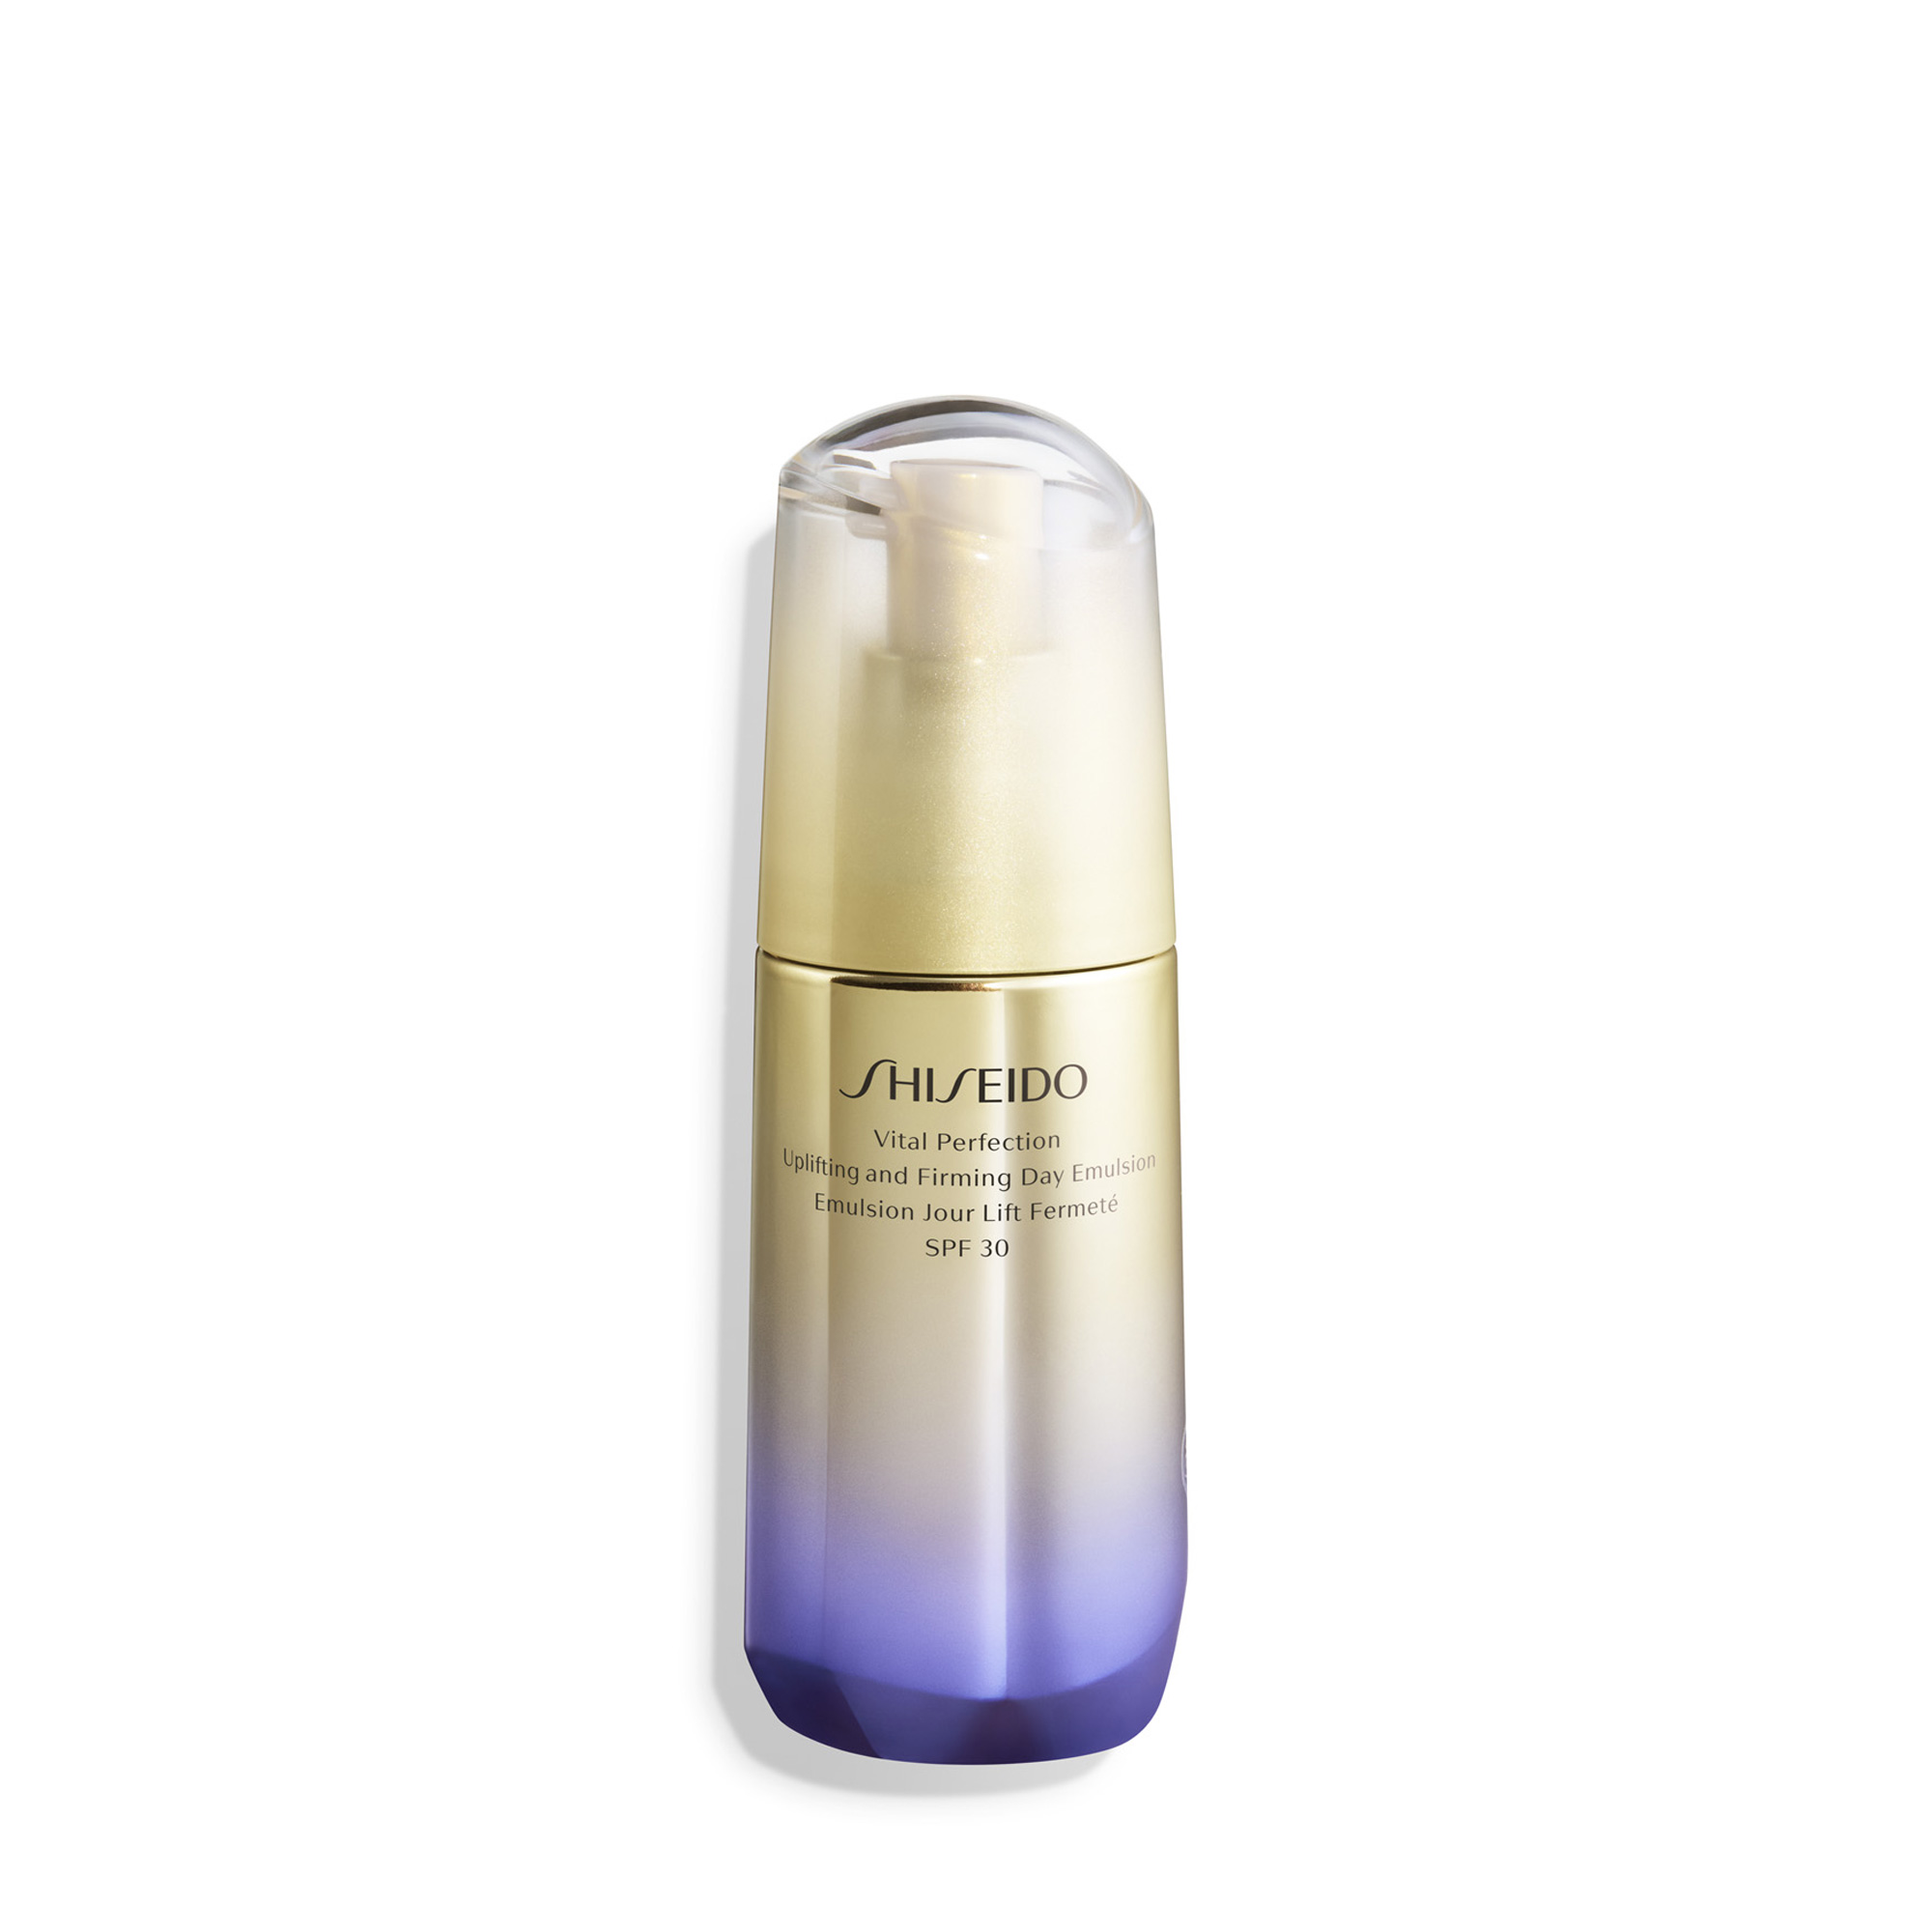 Shiseido-Uplifting and Firming Day Emulsion SPF30